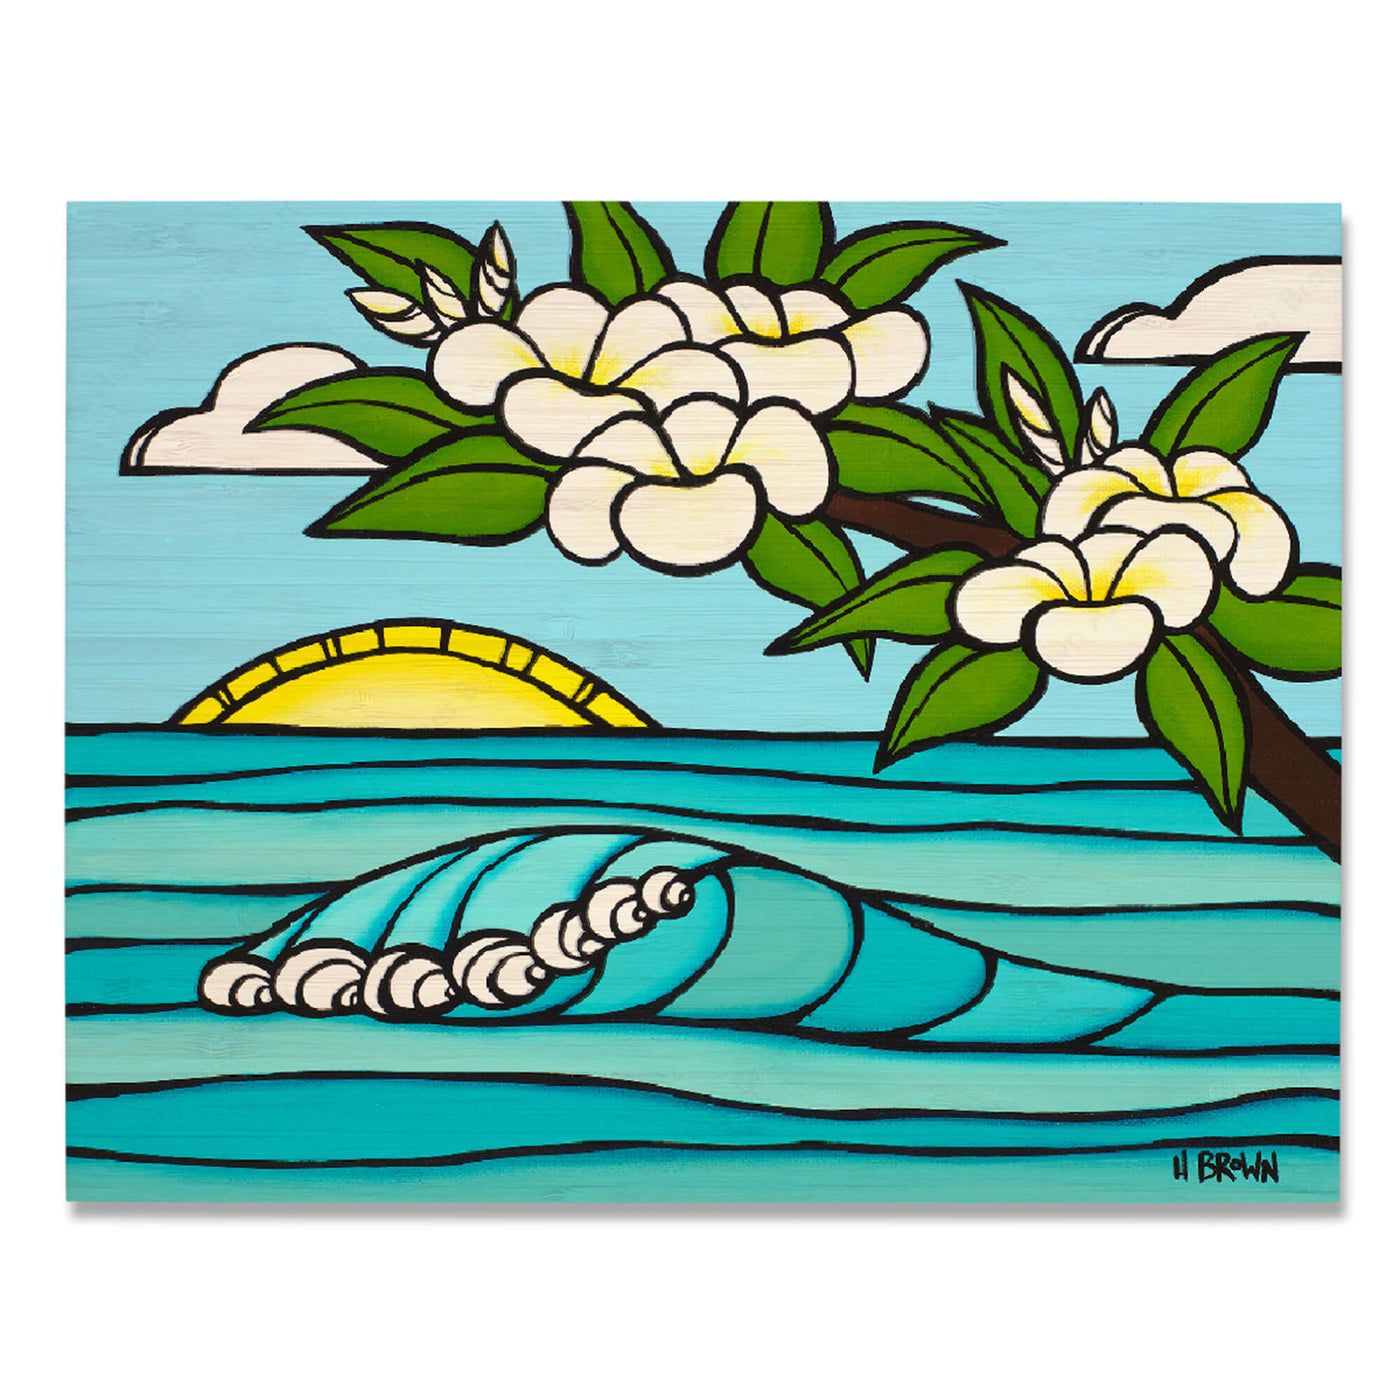 A bamboo print of a sunrise with rolling waves and plumeria flowers by Hawaii surf artist Heather Brown